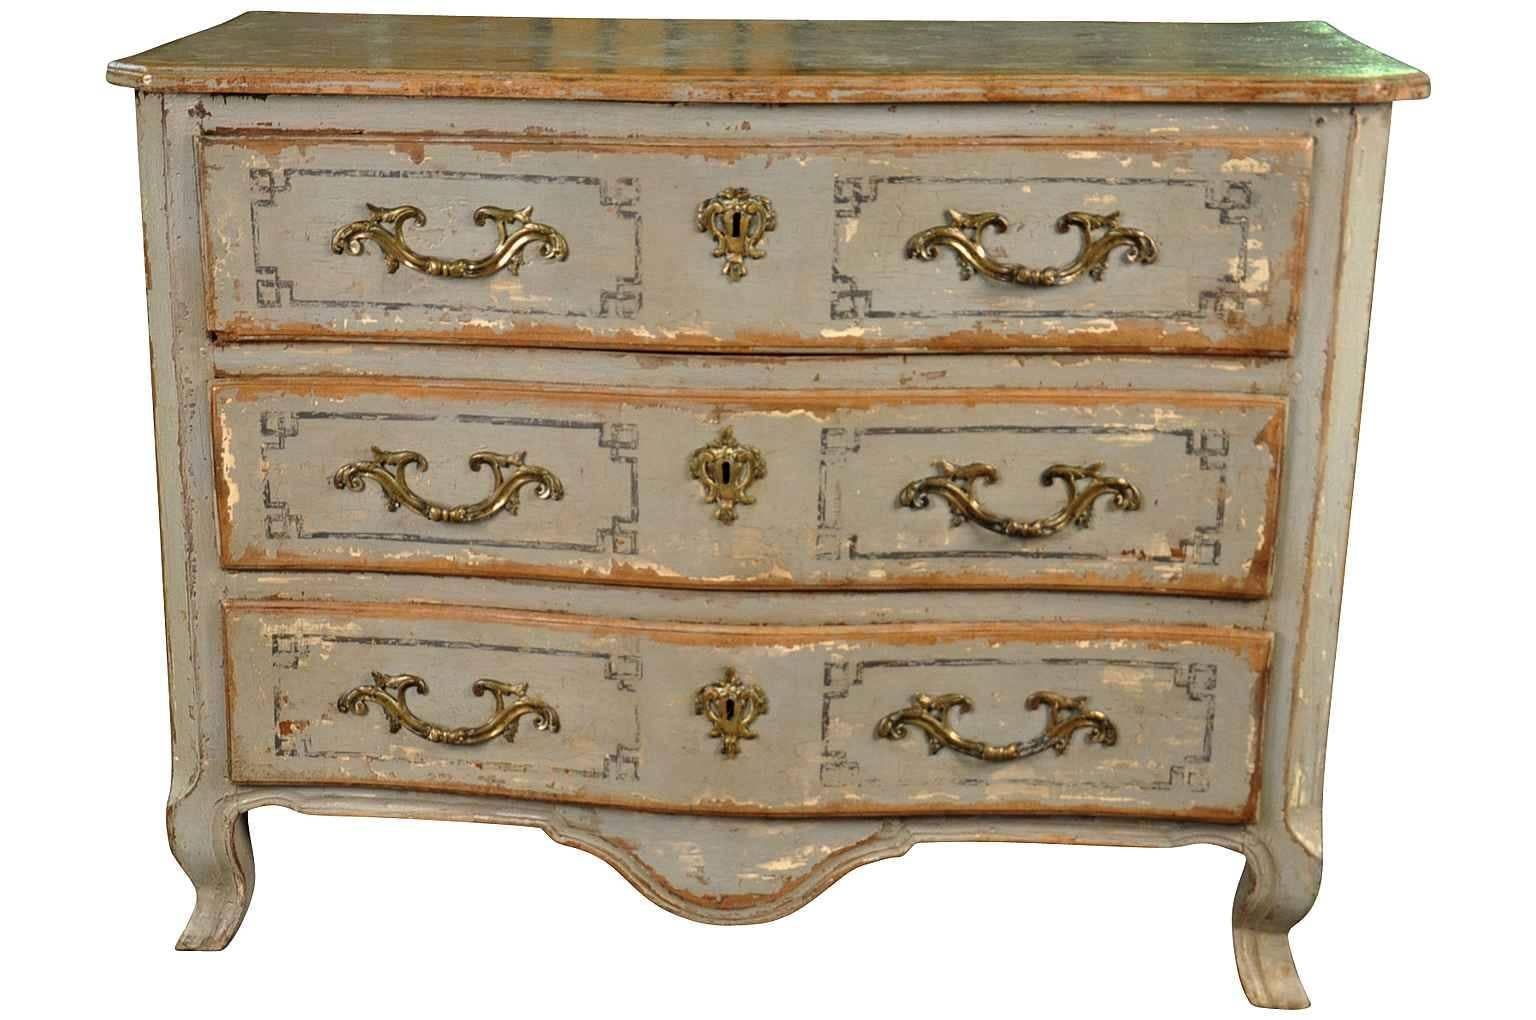 A very lovely French Regence period 18th century commode from the Lyon region of France. Wonderfully constructed with a gentle Arballette form, shaped surface over three drawers. Striking painted finish. A wonderful addition to any living or bedroom